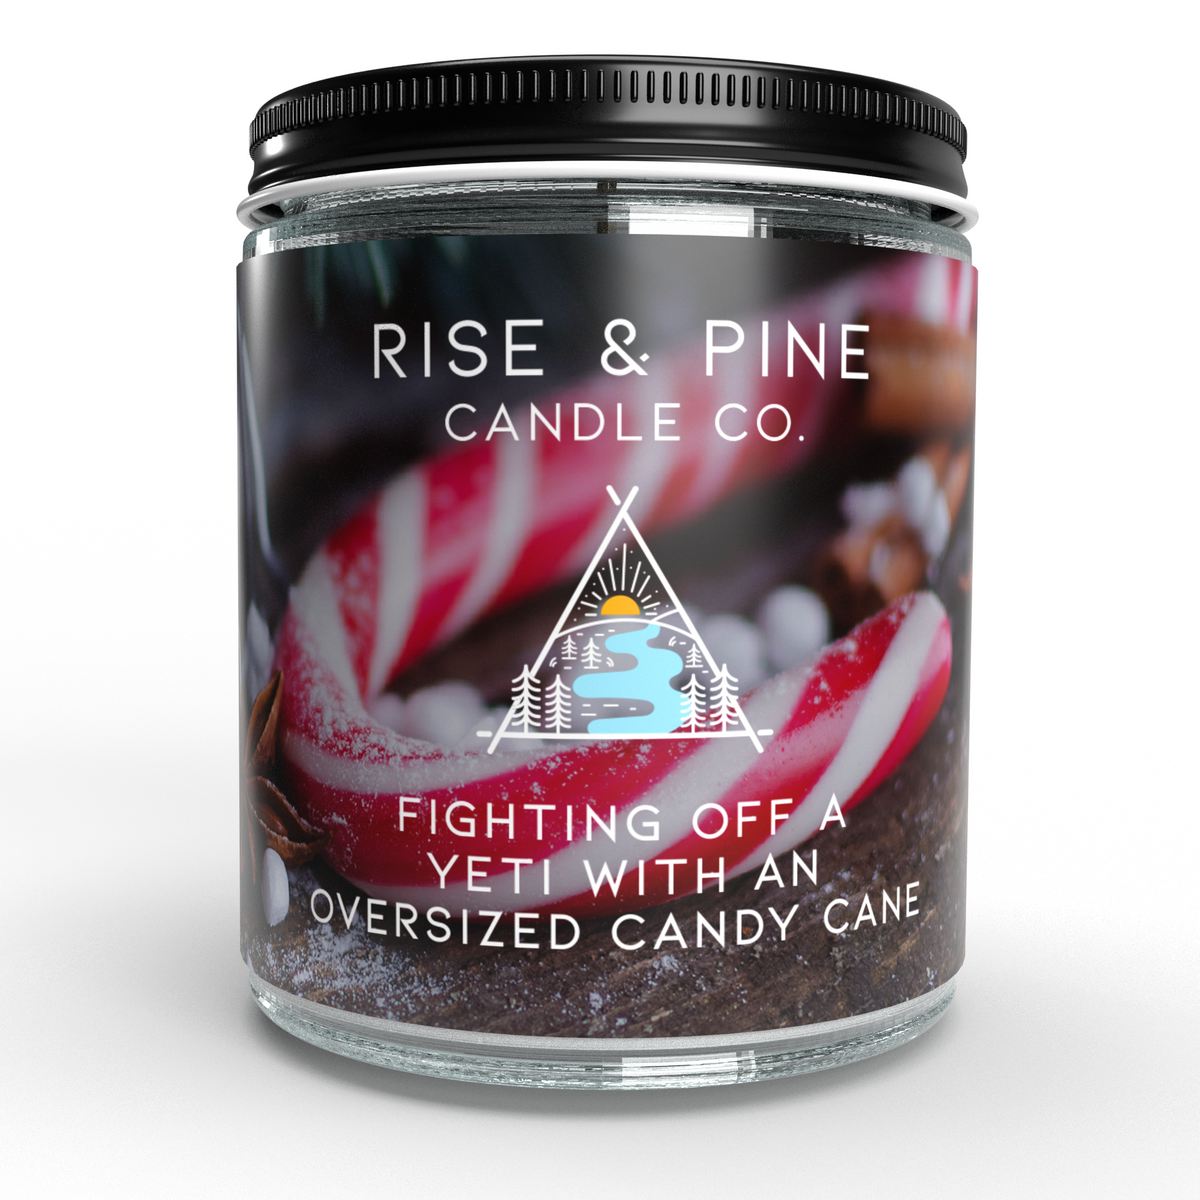 Peppermint Candy Cane Soy Wax Candle